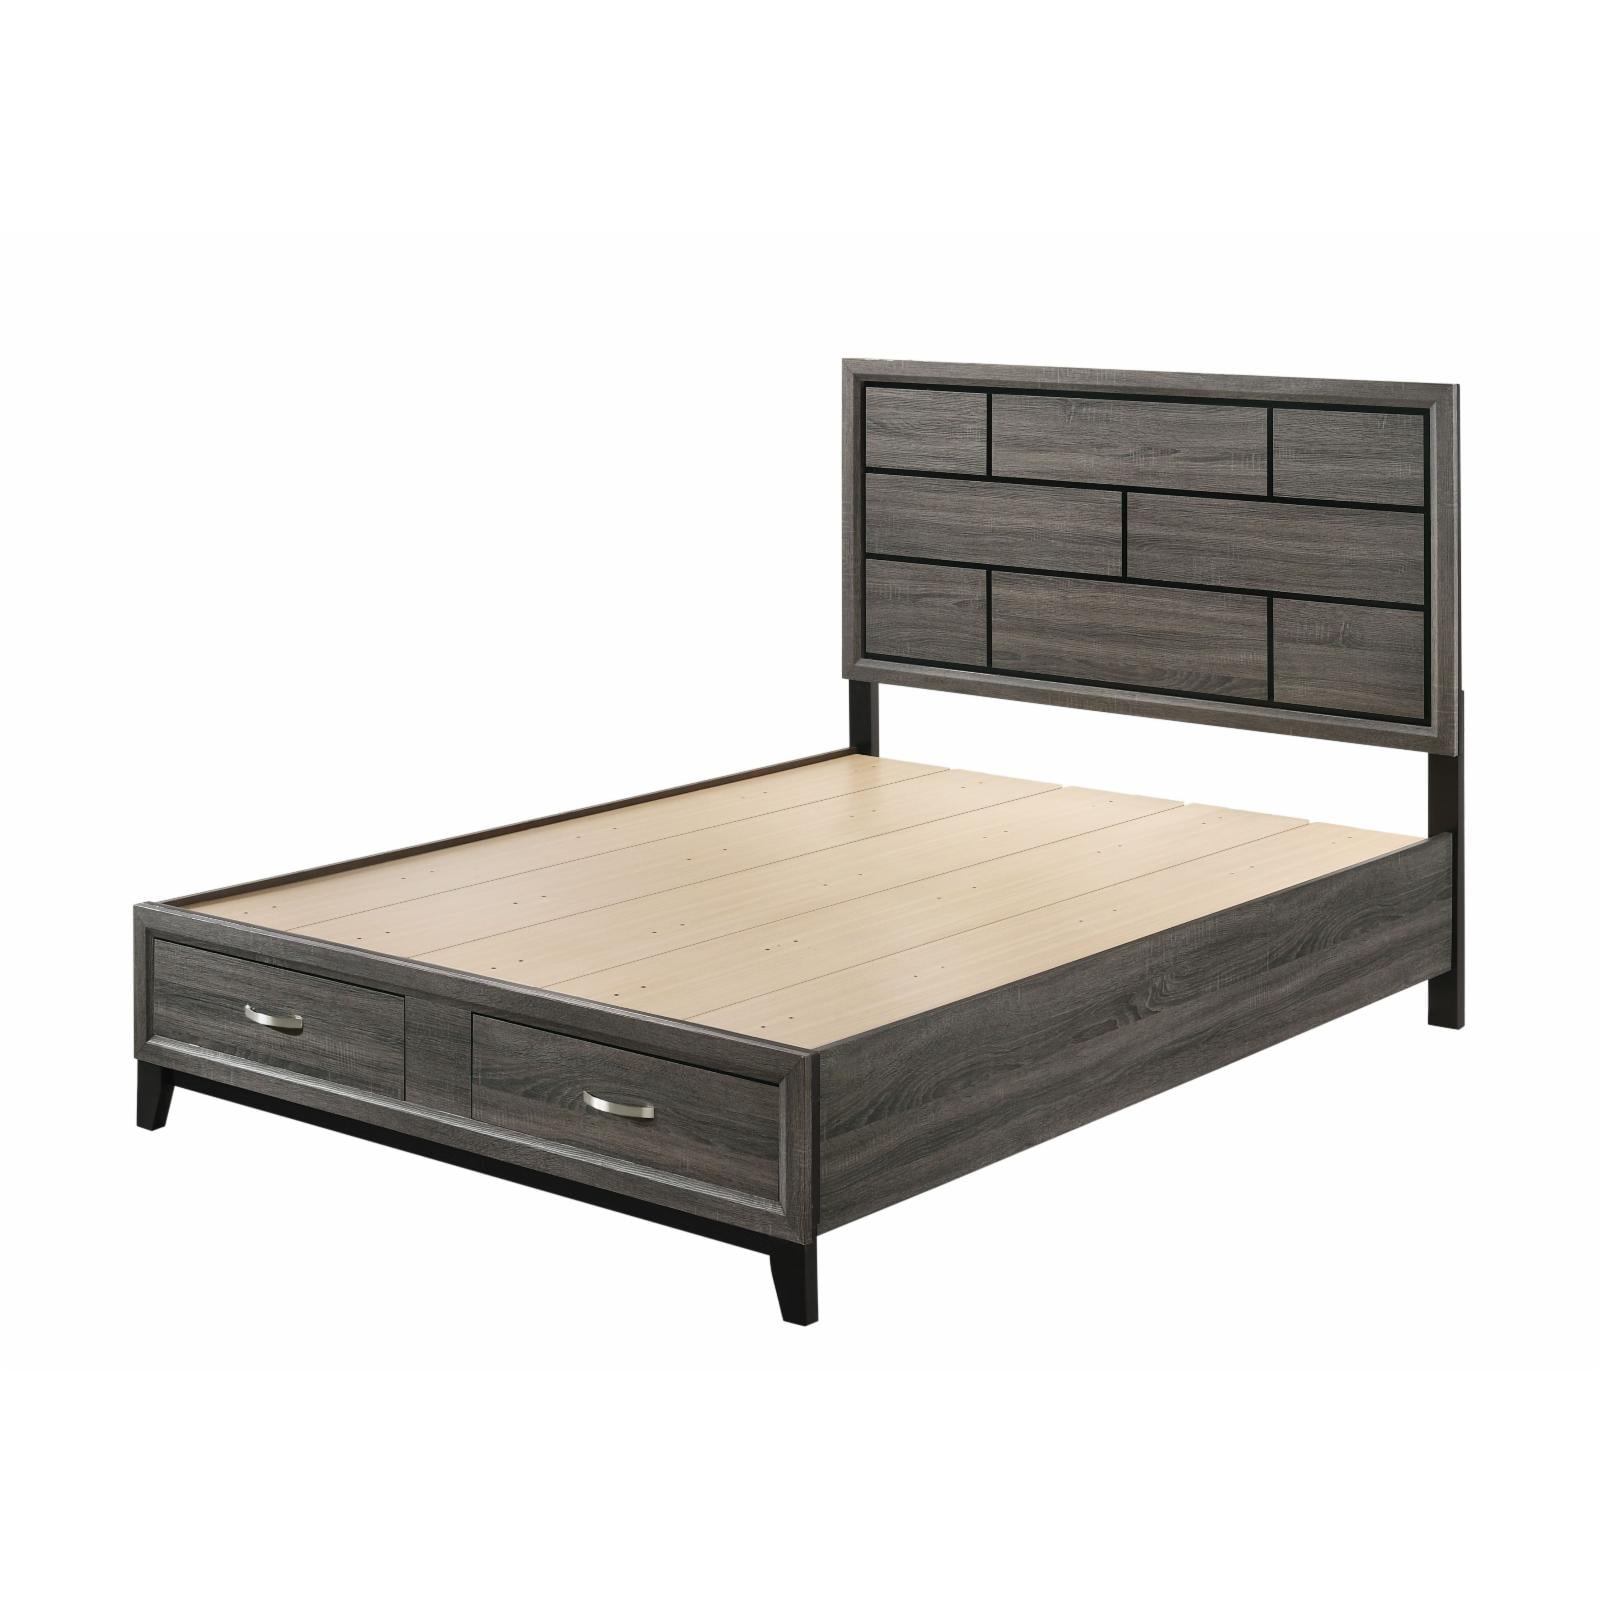 Picture of Acme Furniture 27057EK Valdemar Eastern King Bed with Storage, Weathered Gray